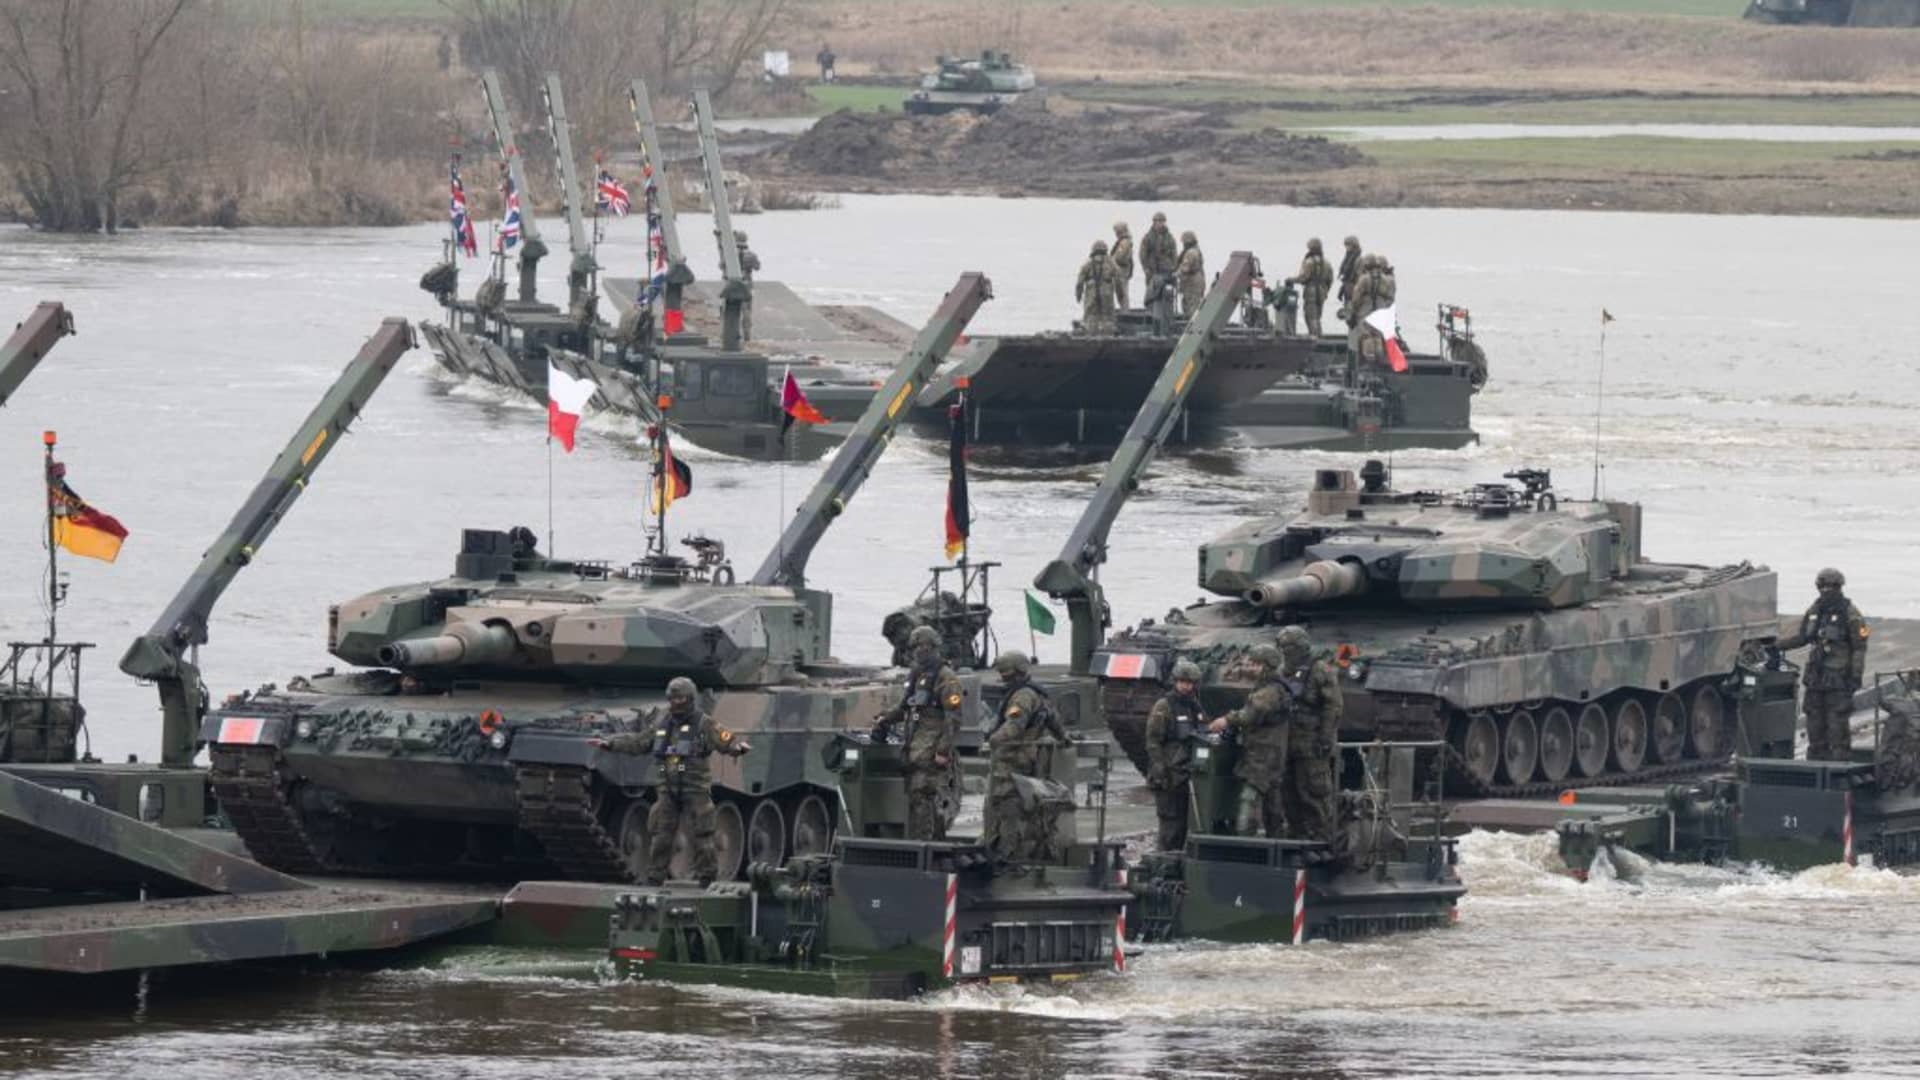 Bundeswehr soldiers and British soldiers take part in a joint military exercise with armed forces from several NATO countries on the Vistula.